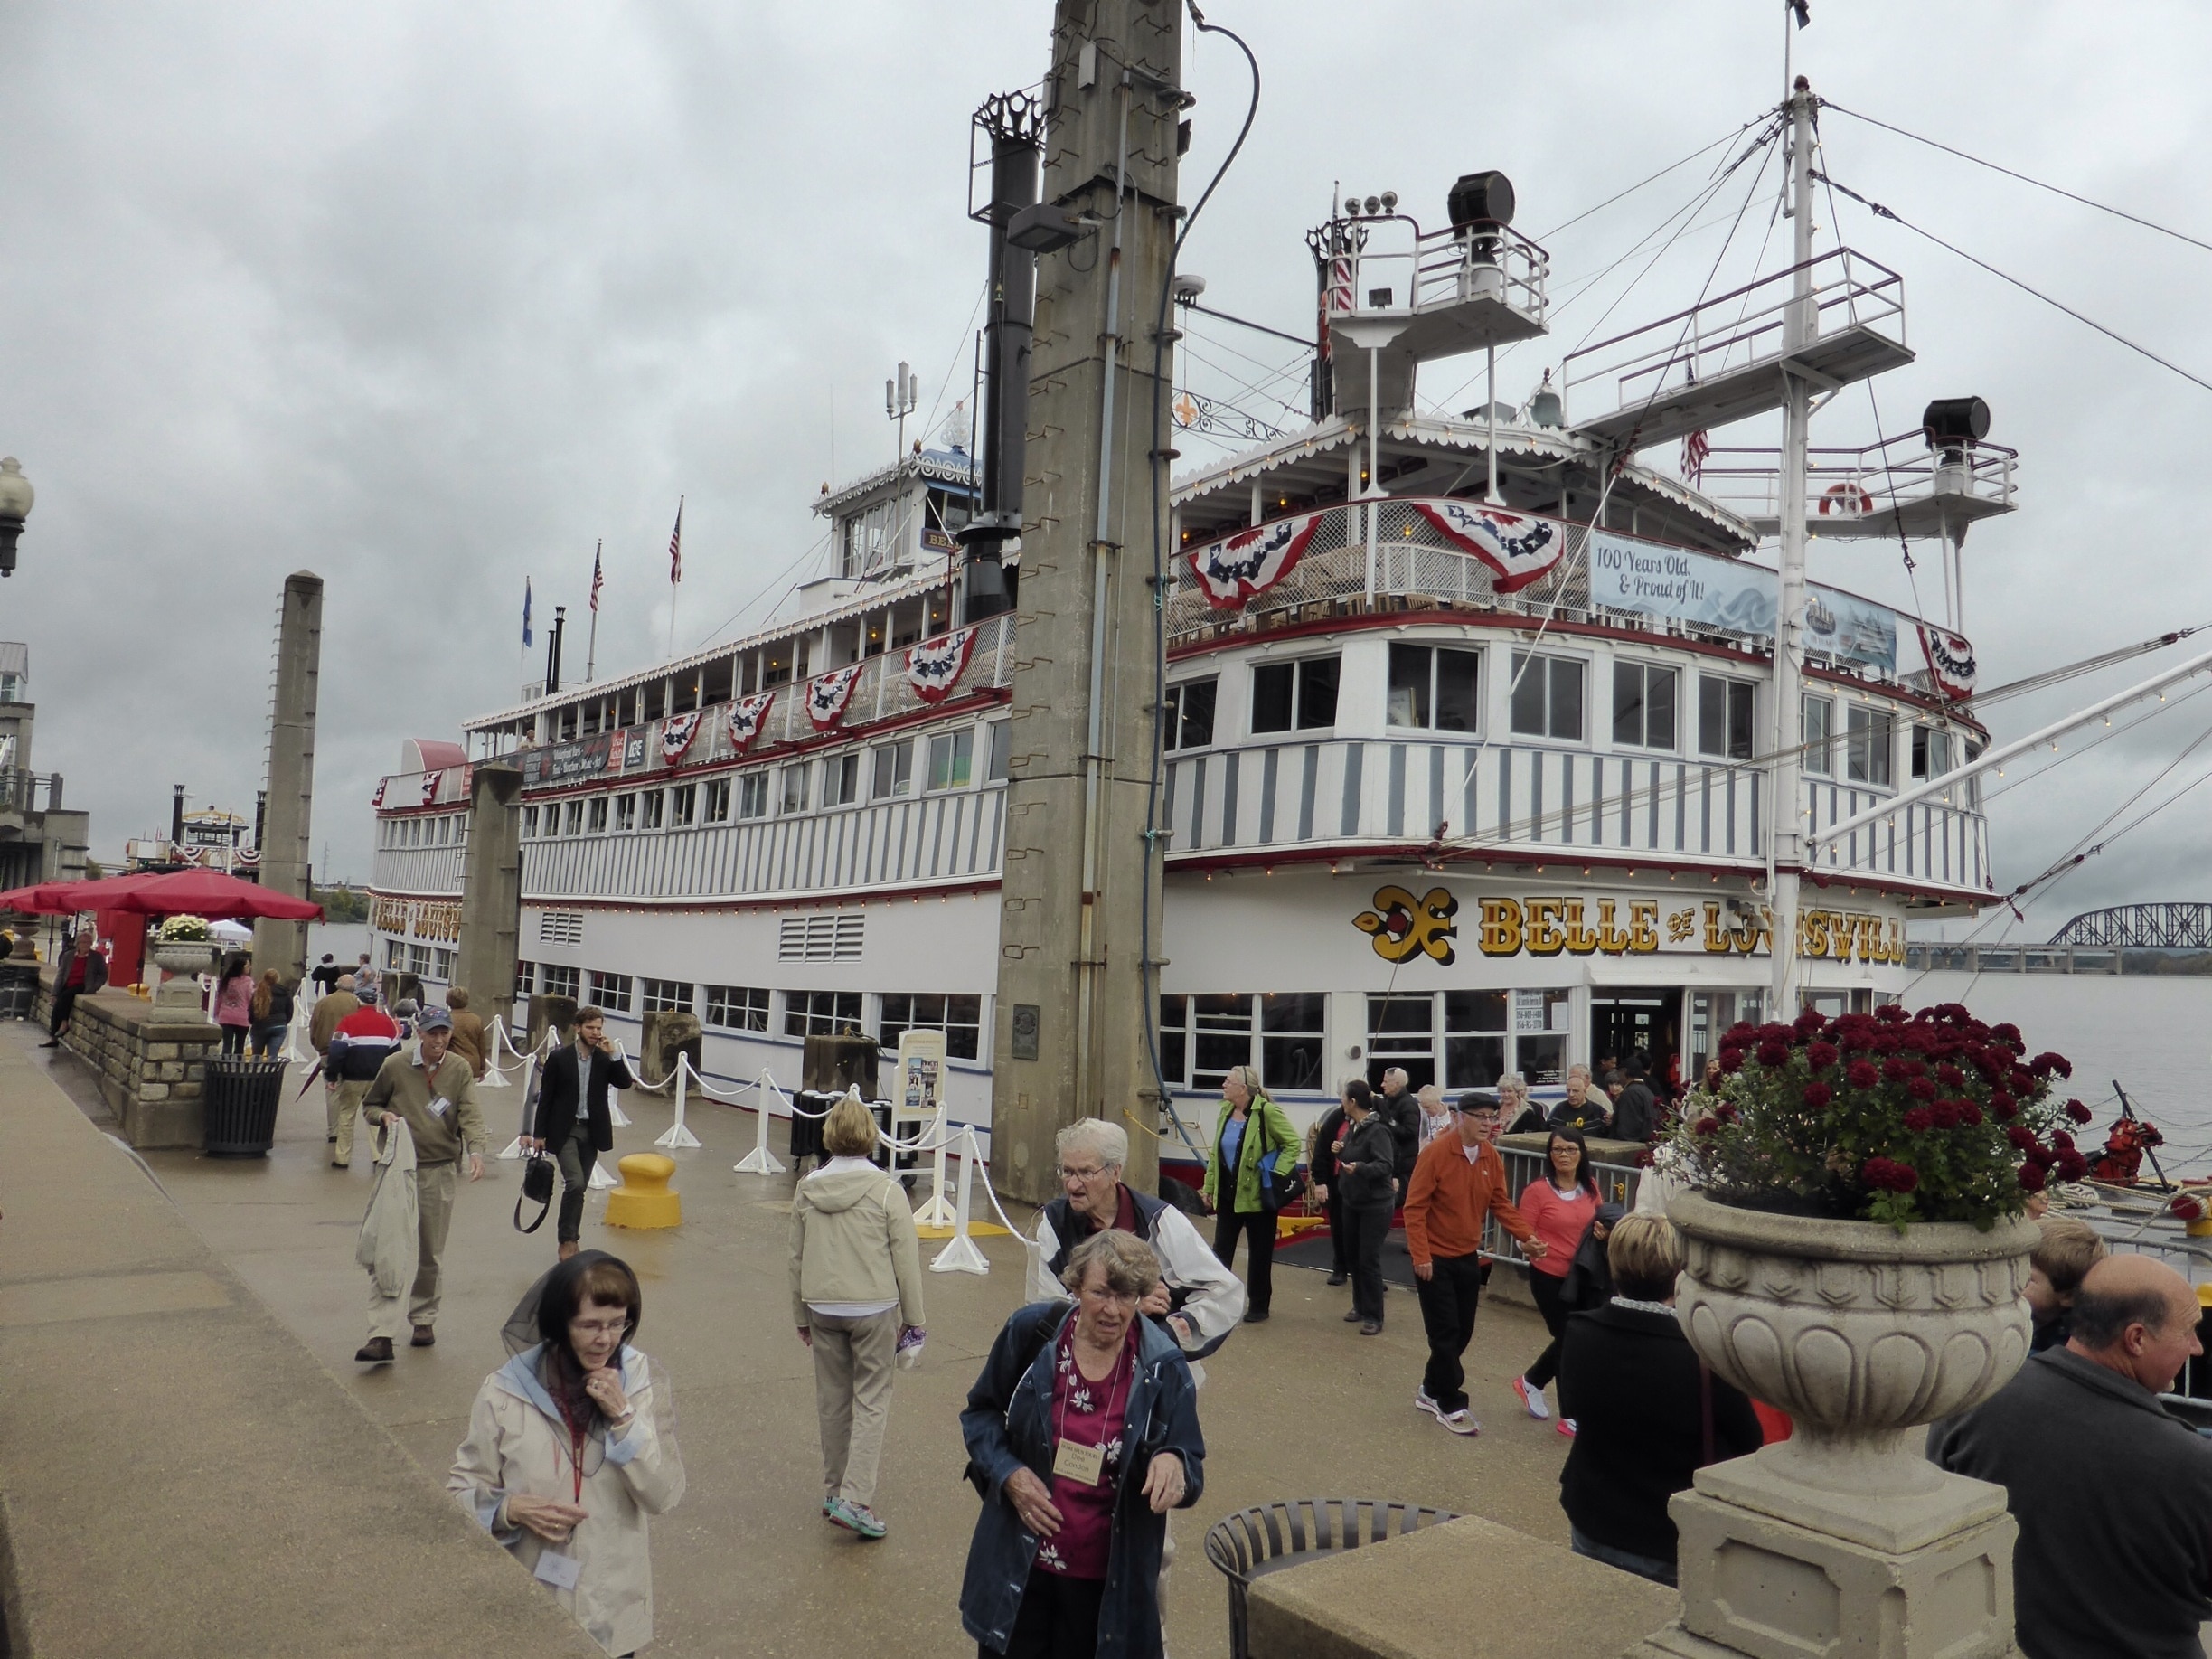 Helped celebrate the Belle of Louisville's 100th birthday with a cruise up the Ohio River. 